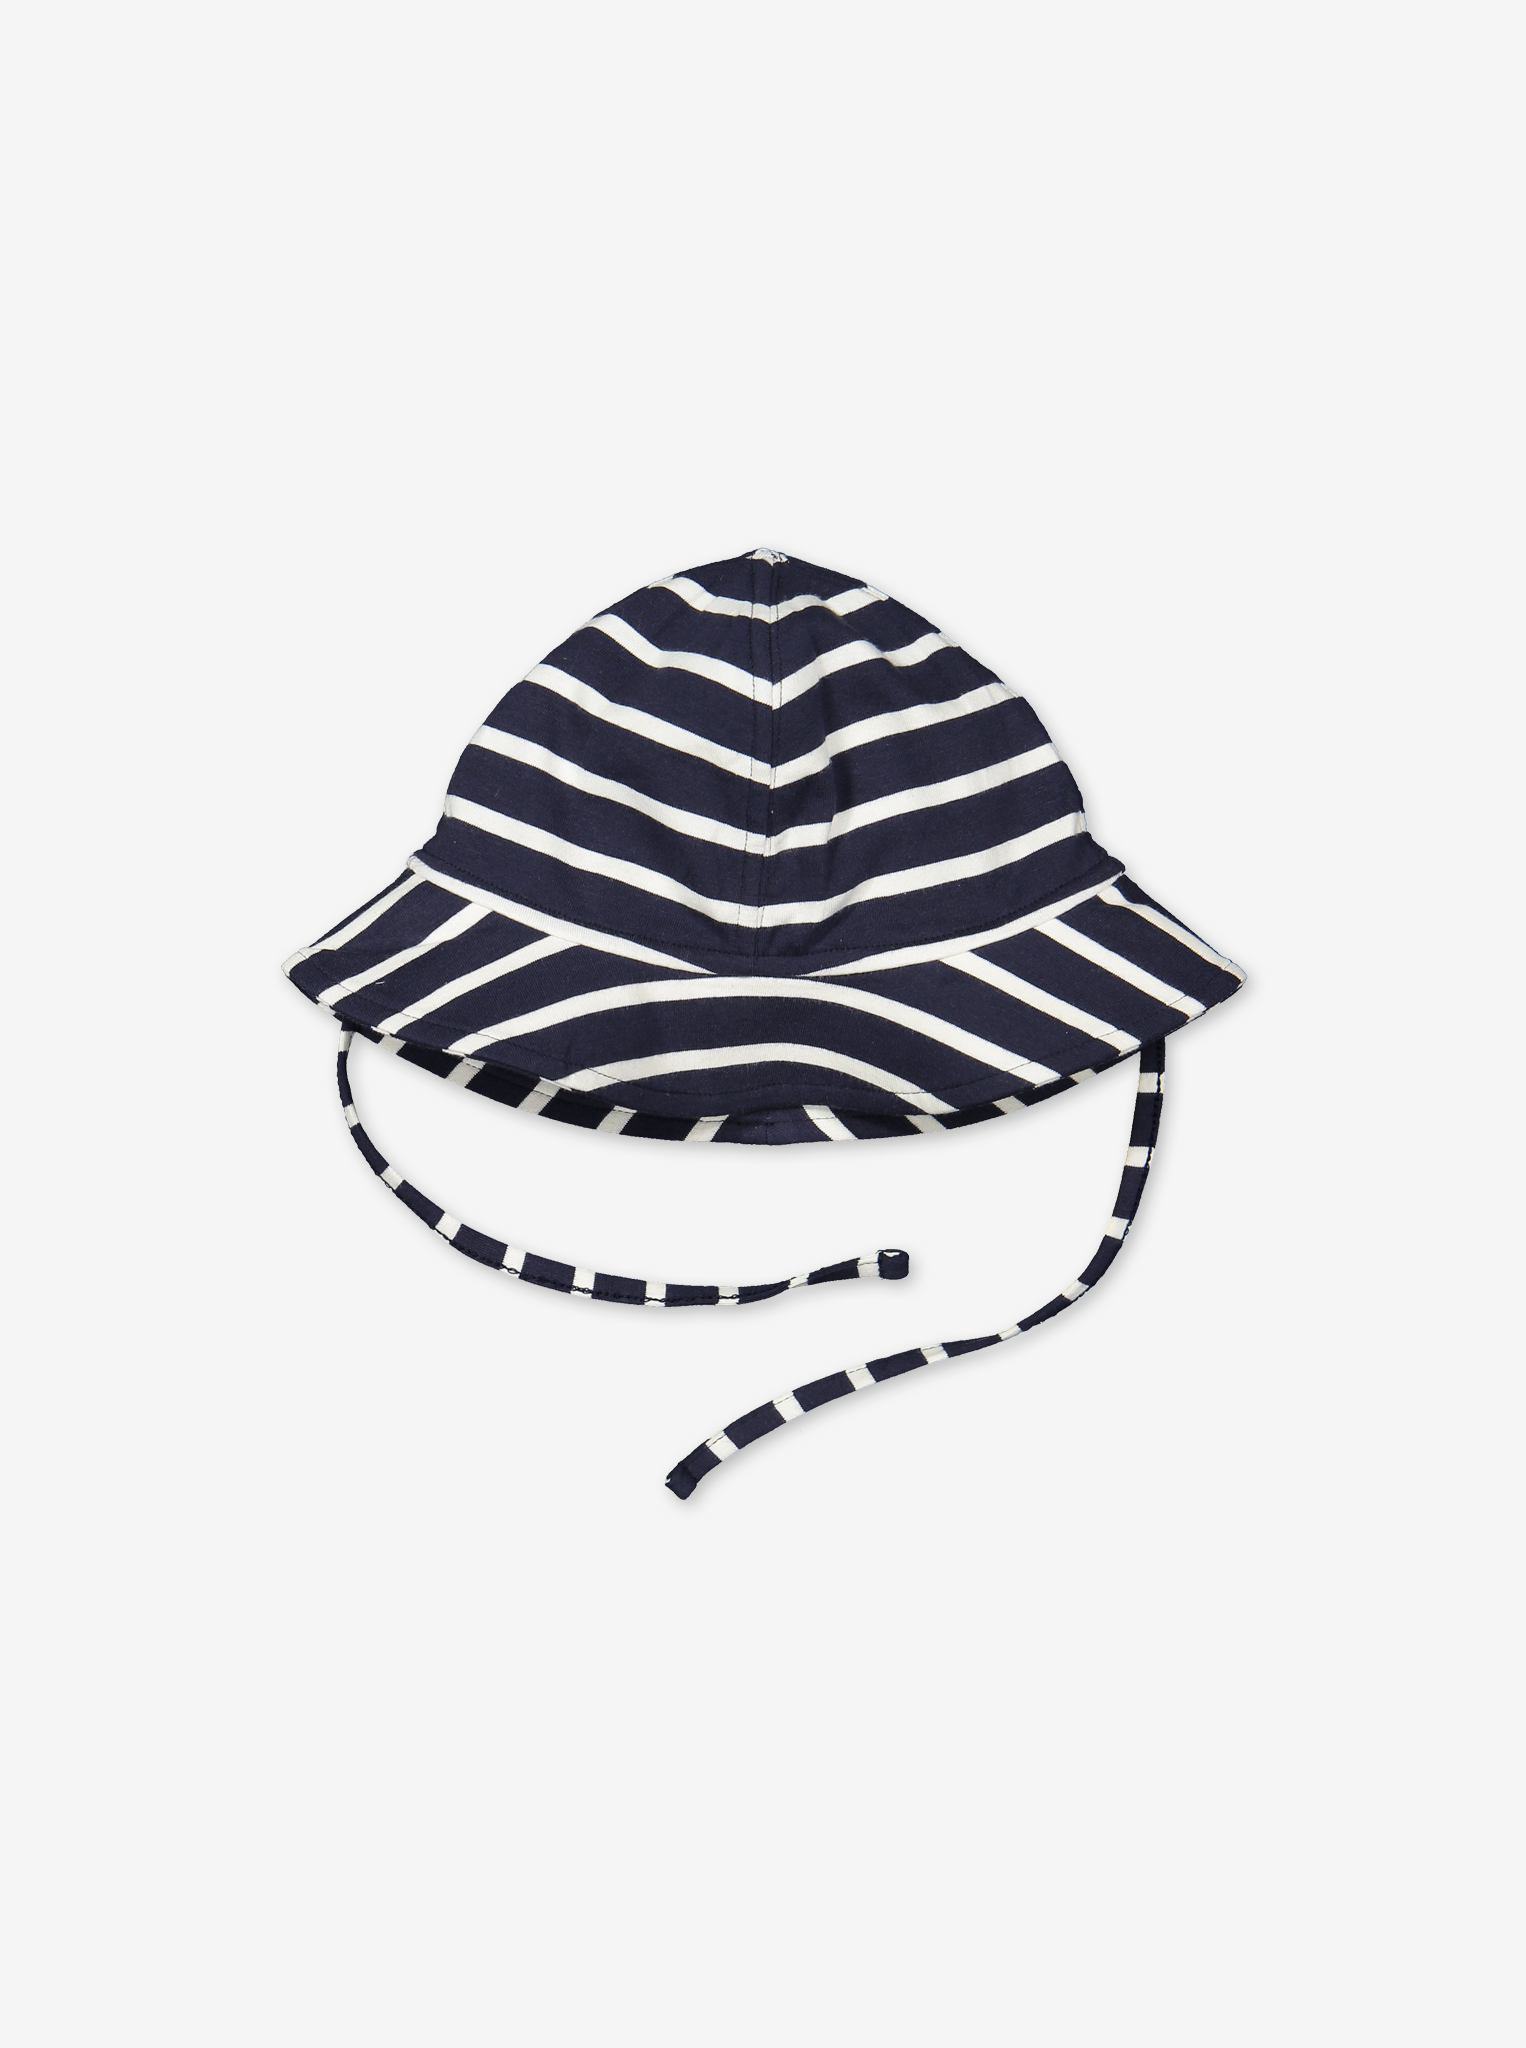 Striped sun hat with tie strings for baby